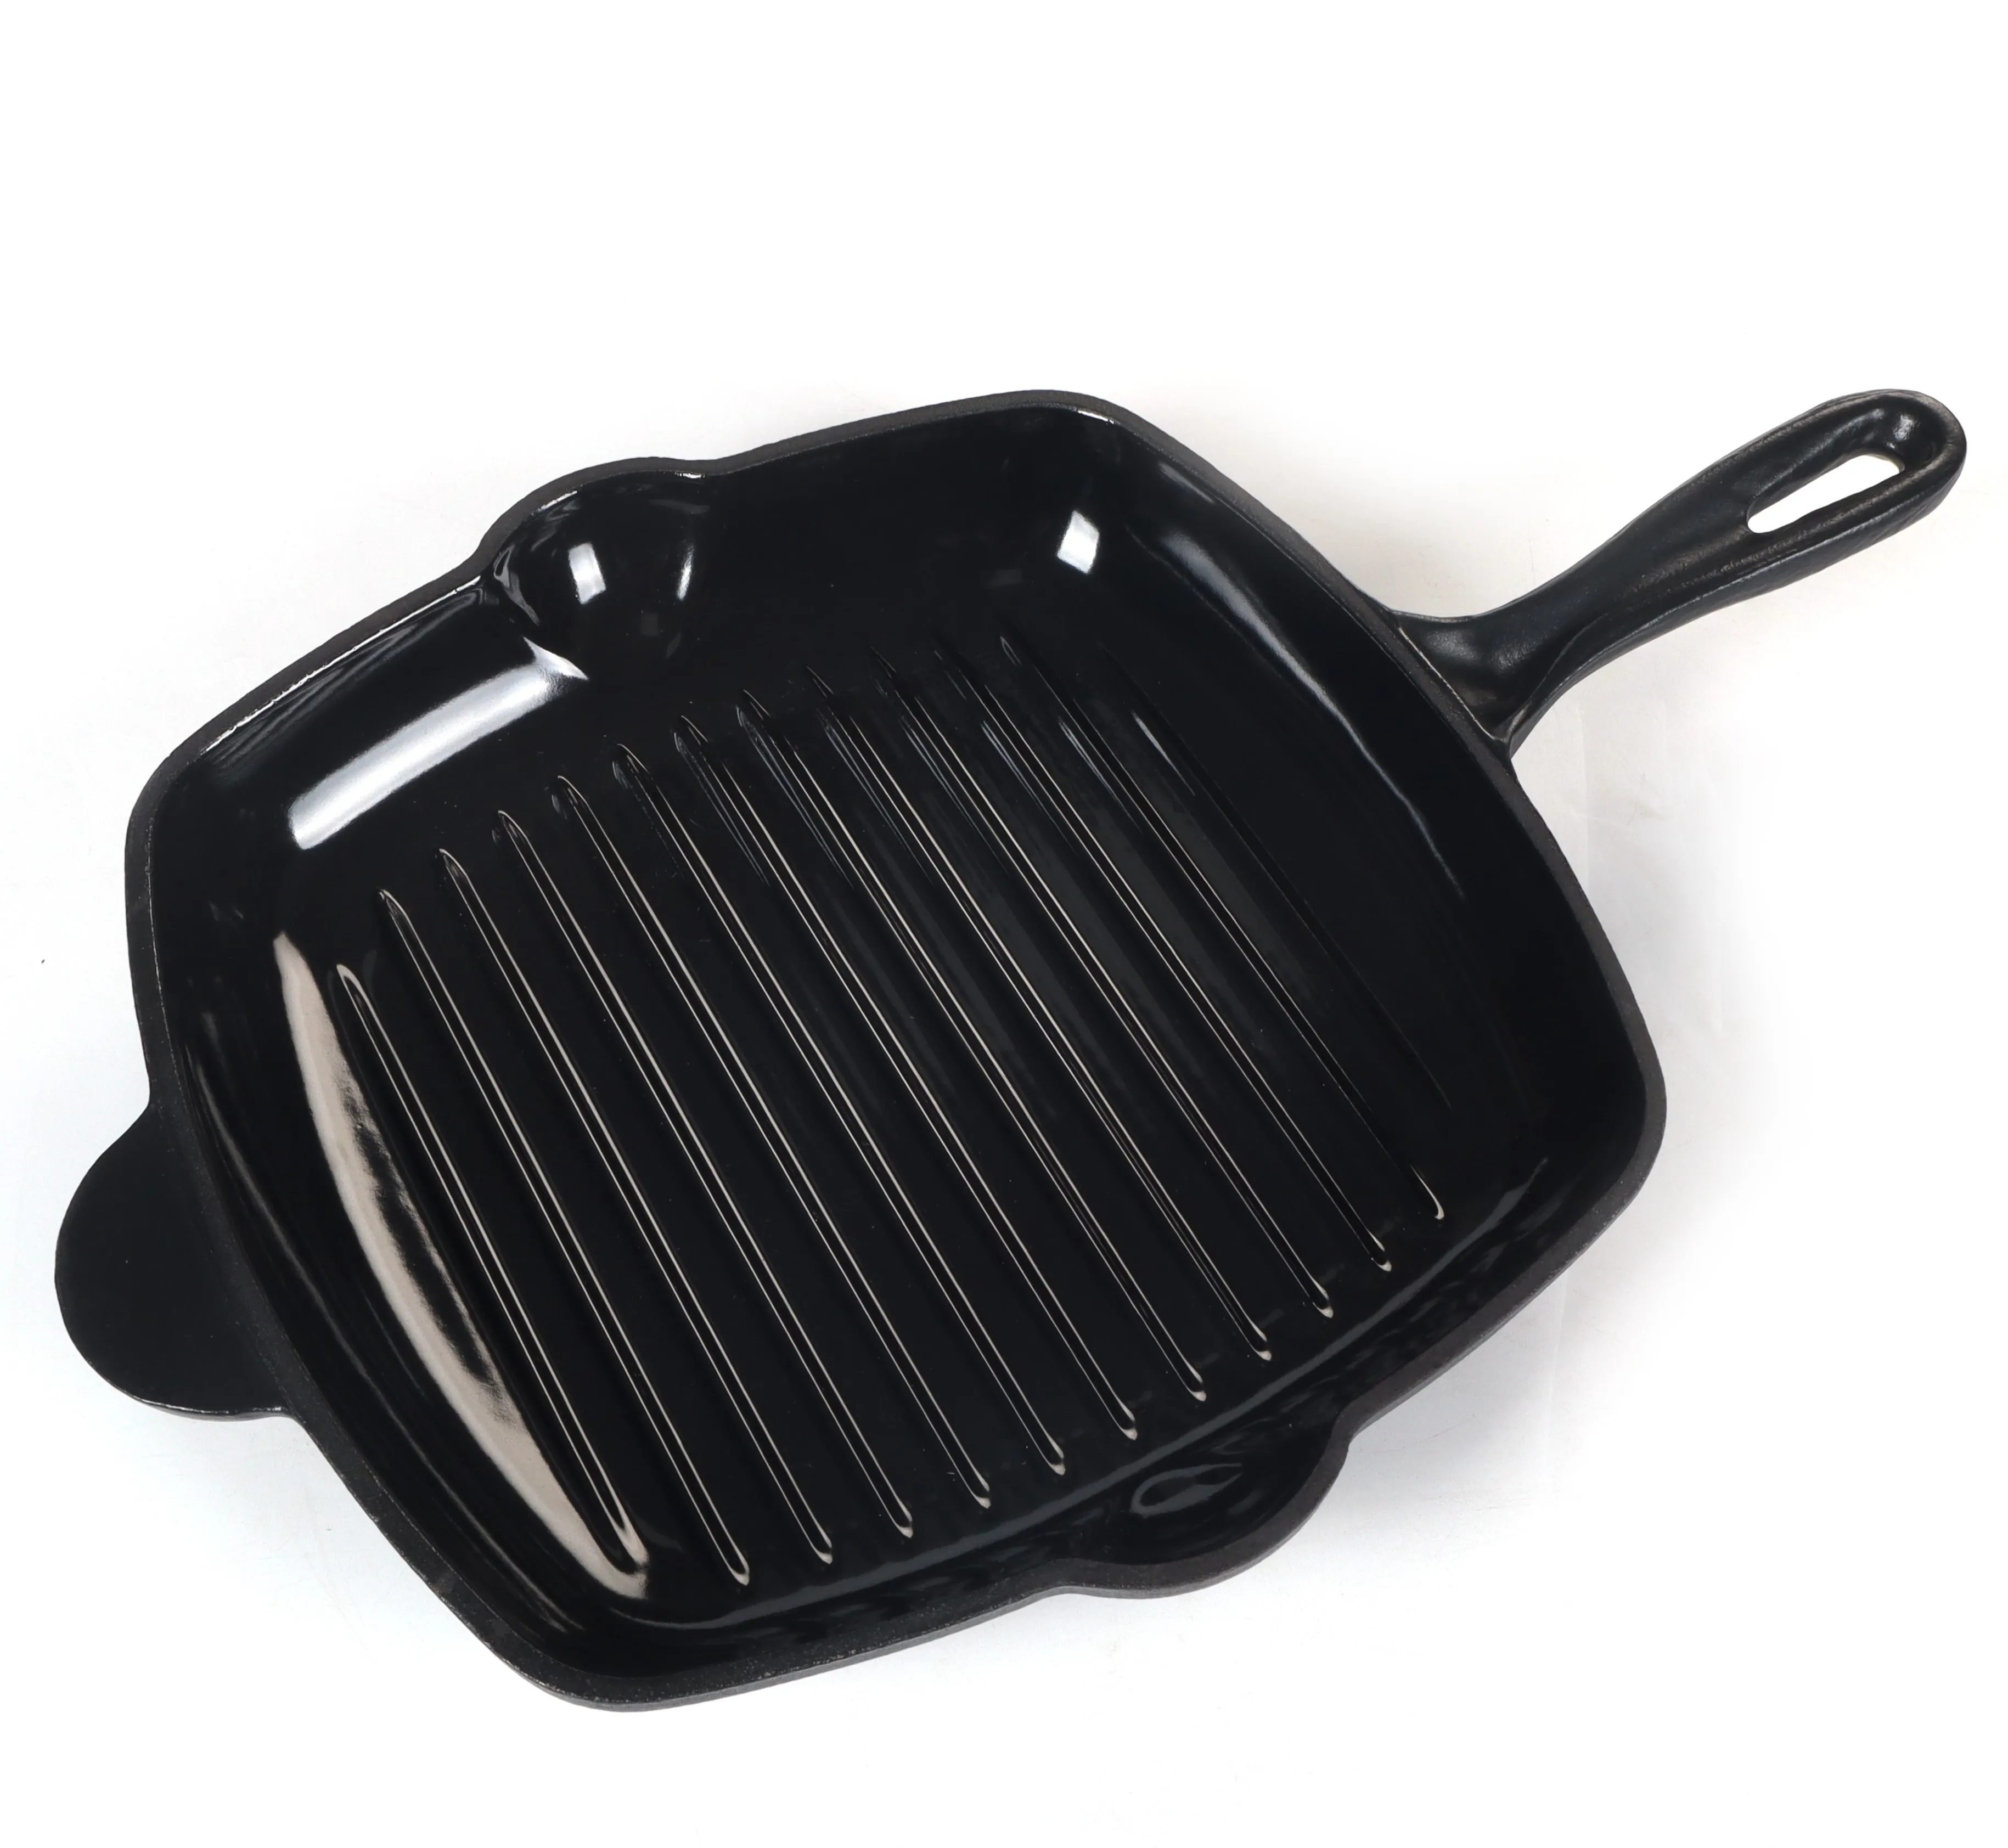 24cm 26cm Non Stick Small Large Griddle Grill Fry Pan High Temperature Enamel Pre-seasoned Cast iron Skillet